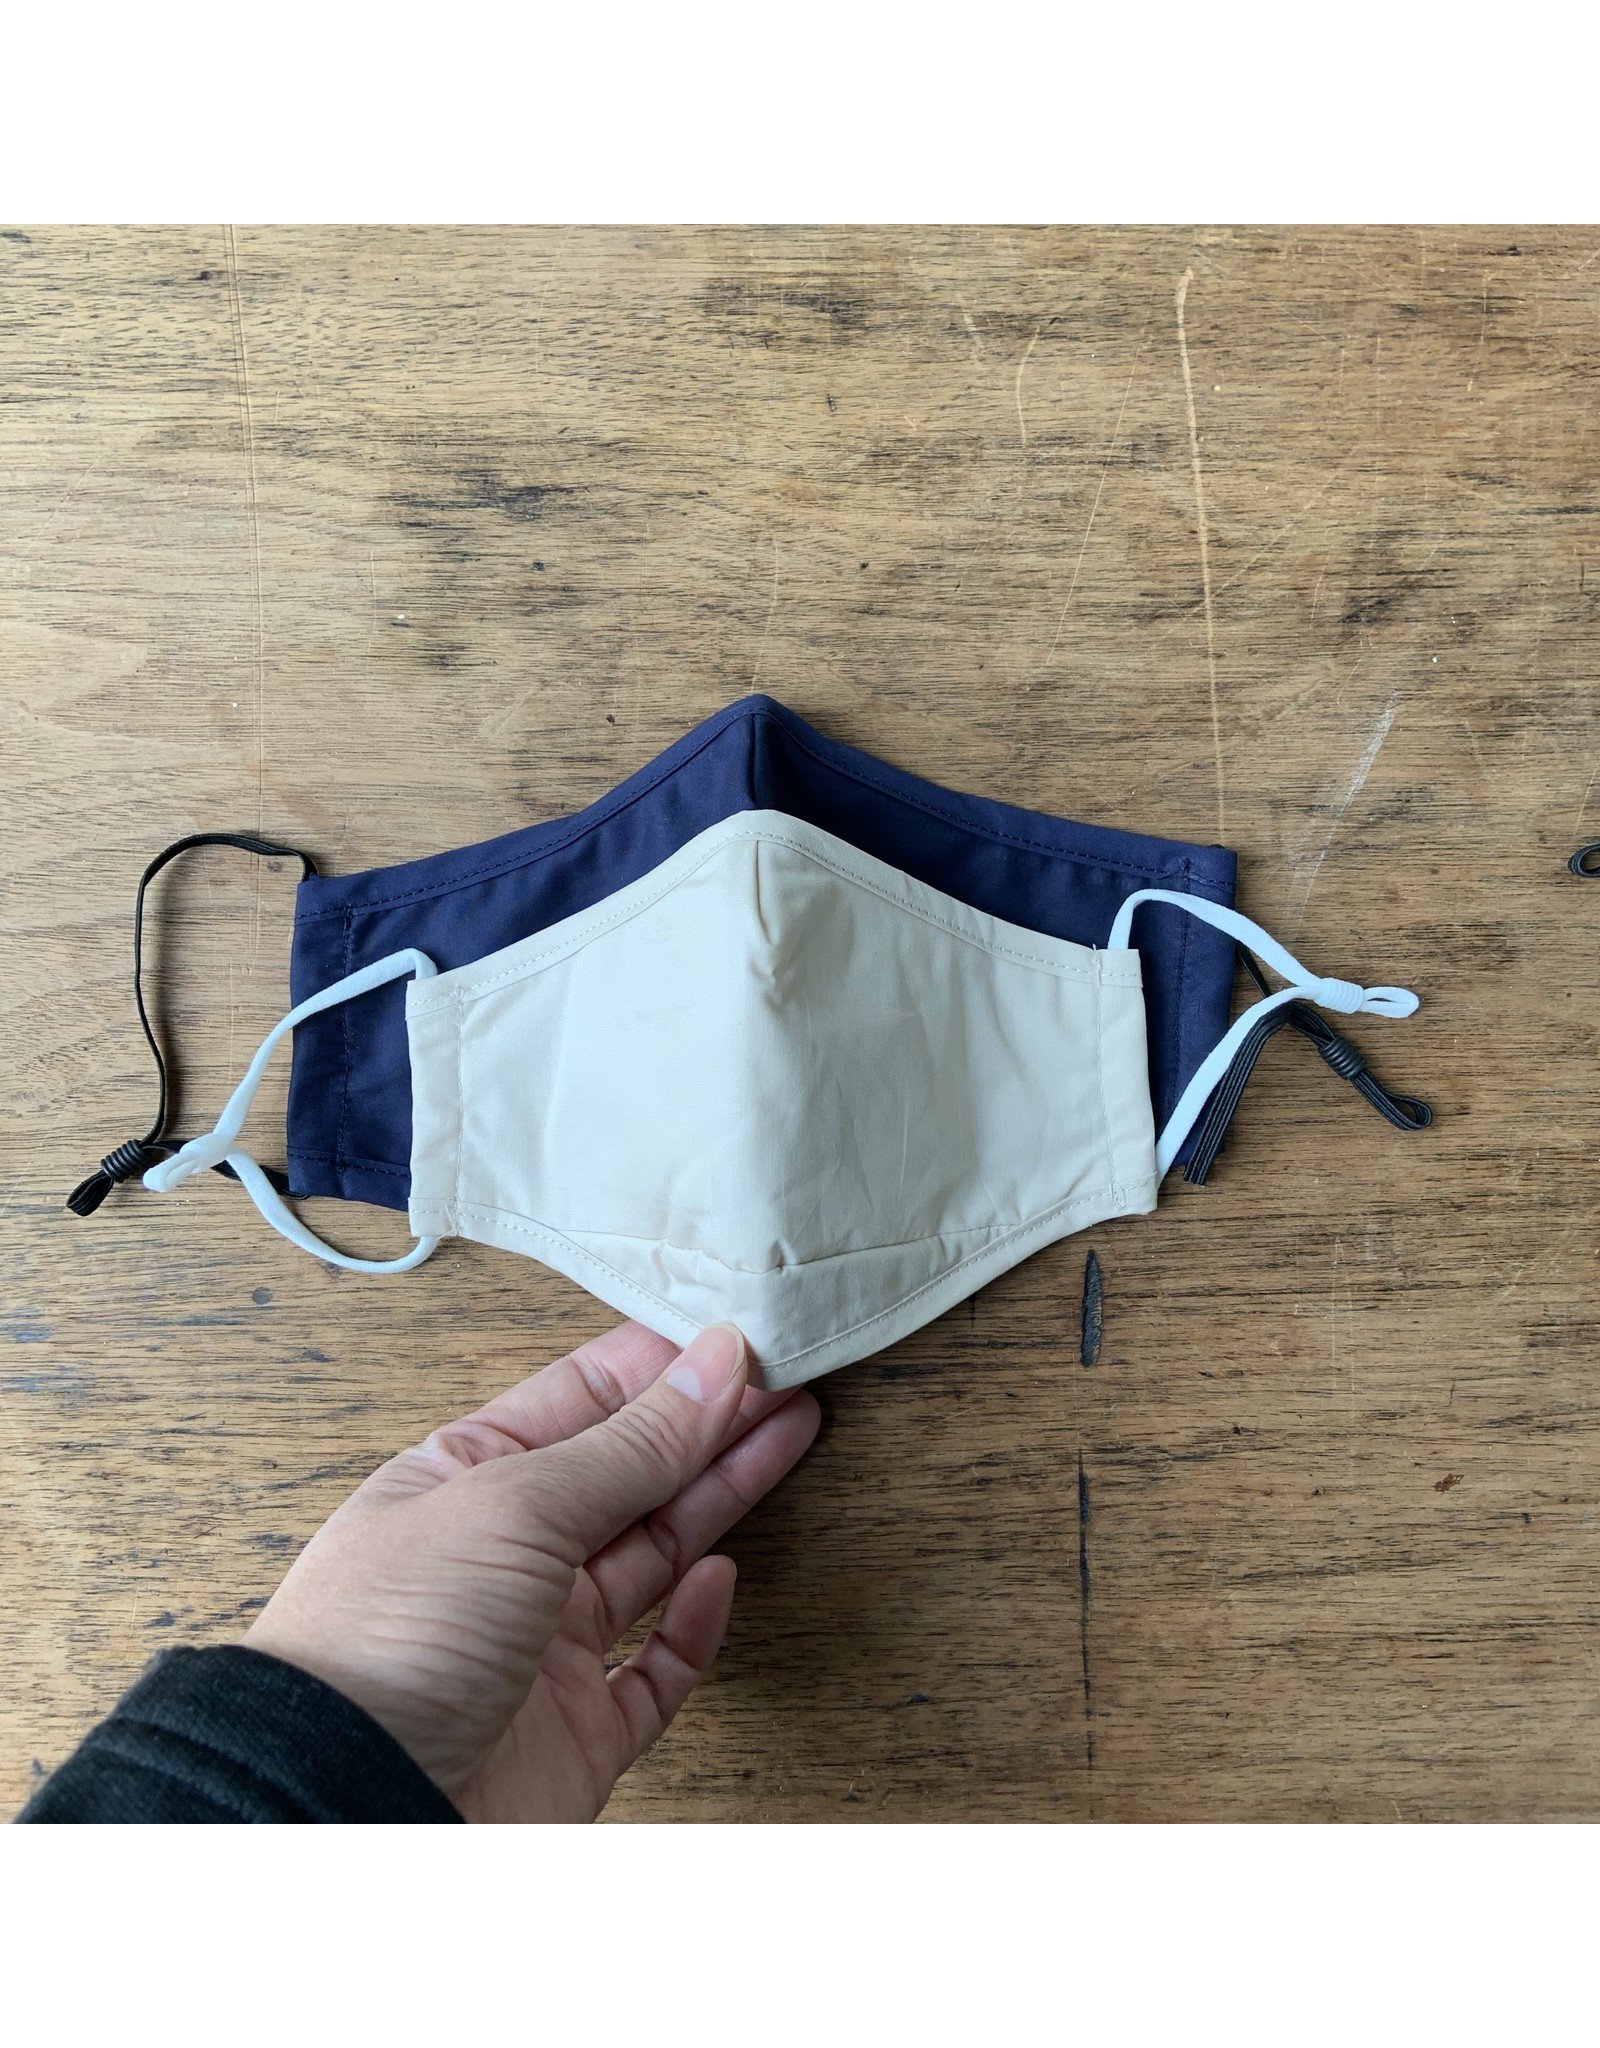 The Better Farm Co. Reusable Adult's Cloth Mask by The Better Farm  (Navy)